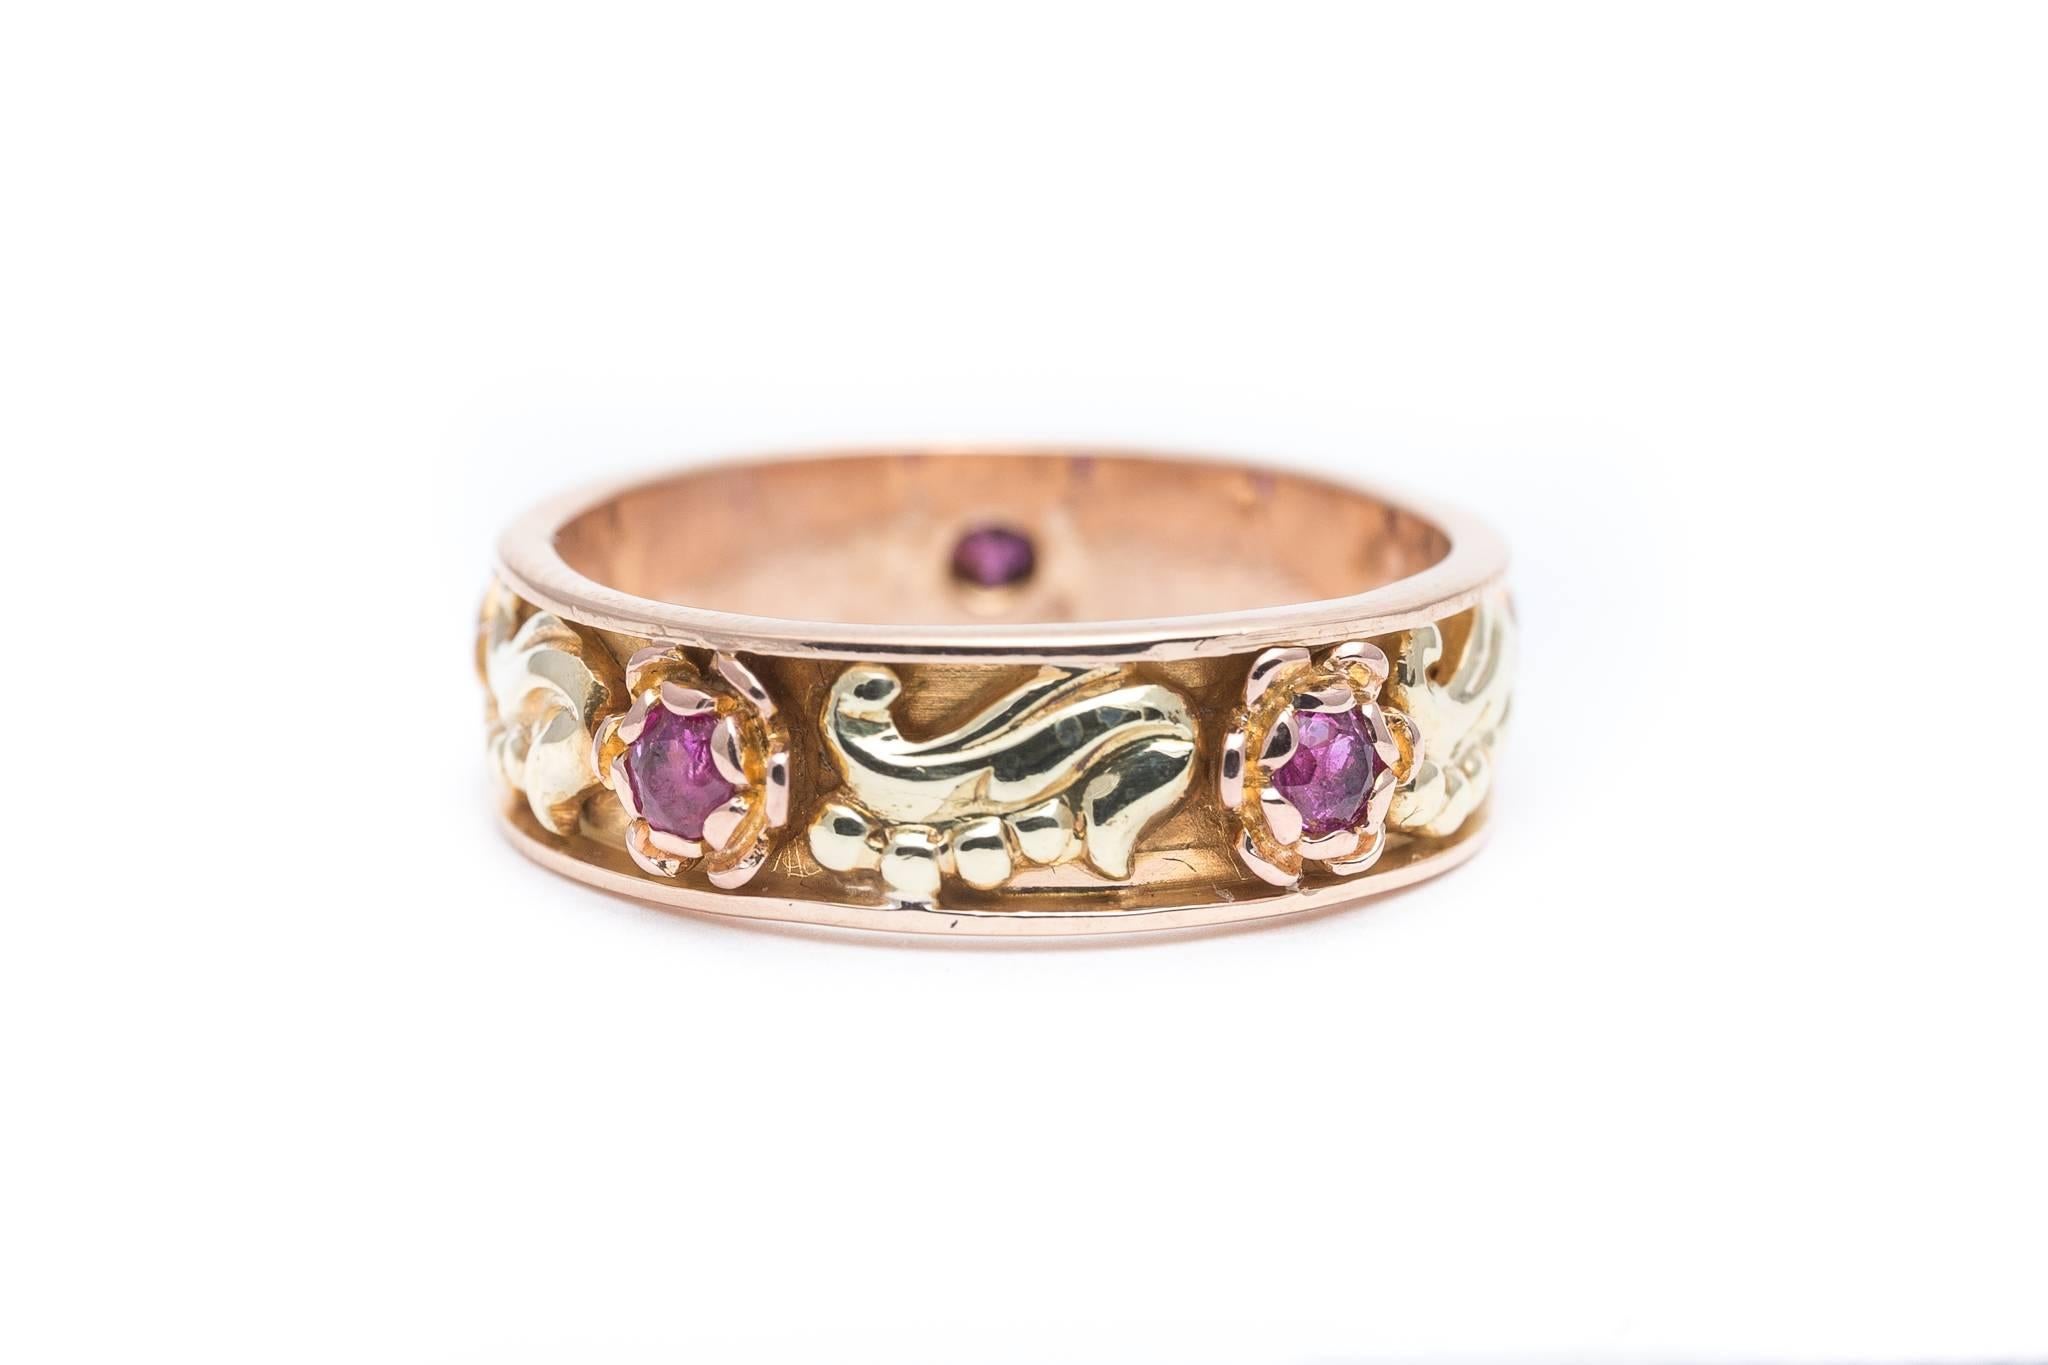 A beautiful original vintage retro period ruby wedding band in yellow, and rose gold.  Featuring a total of five vintage European cut rubies set in the center of beautifully detailed rose gold flowers this ring features yellow gold leaves in-between